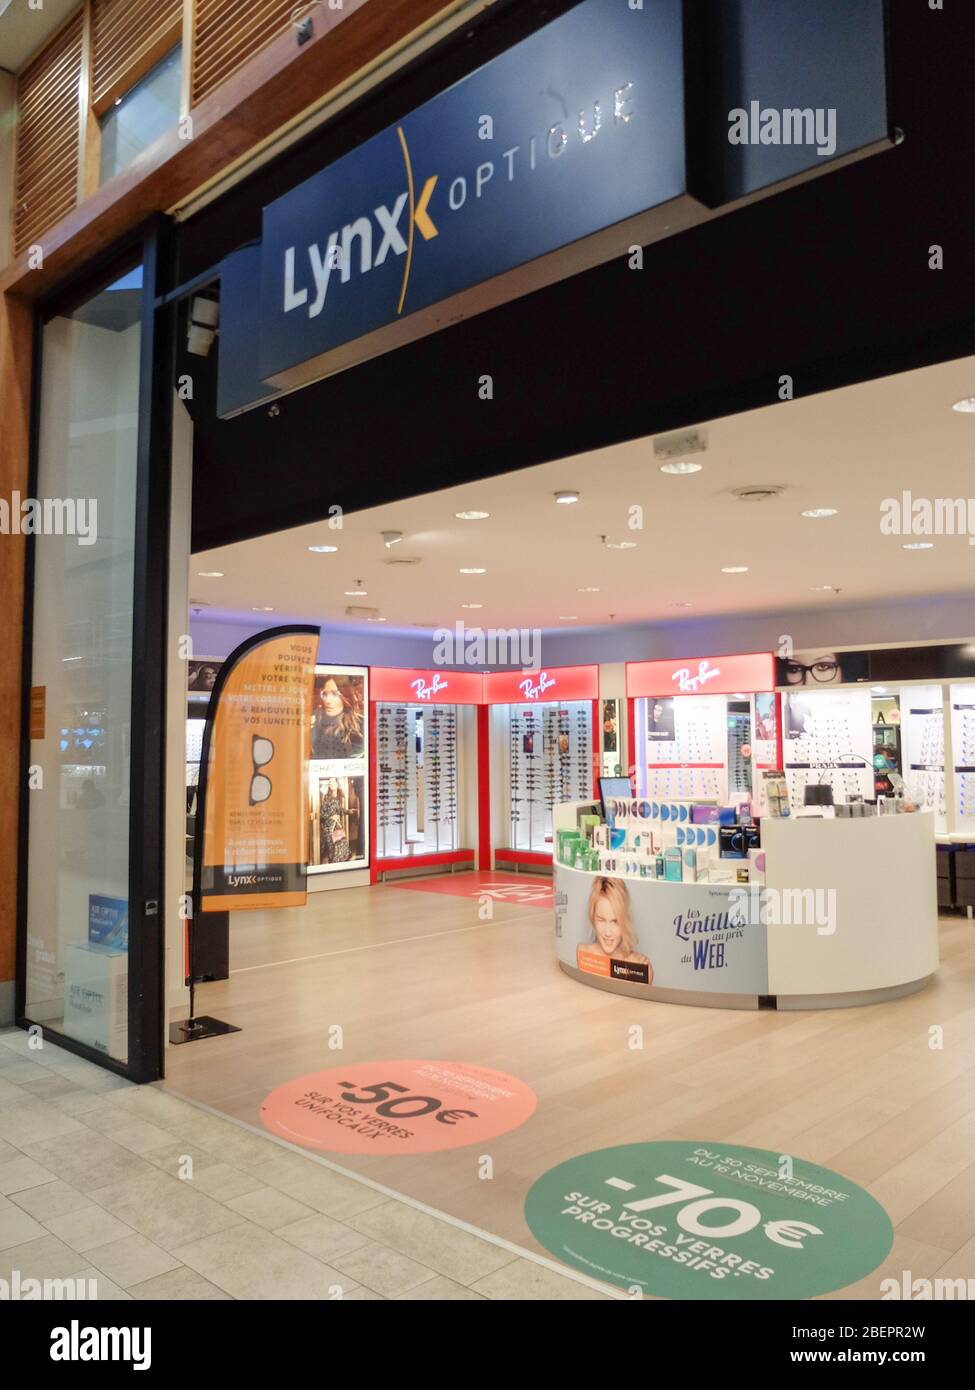 Lynx Optique storefront. Lynx Optique is a French optical store selling contact lenses, glasses and cleaning products at discount prices Stock Photo